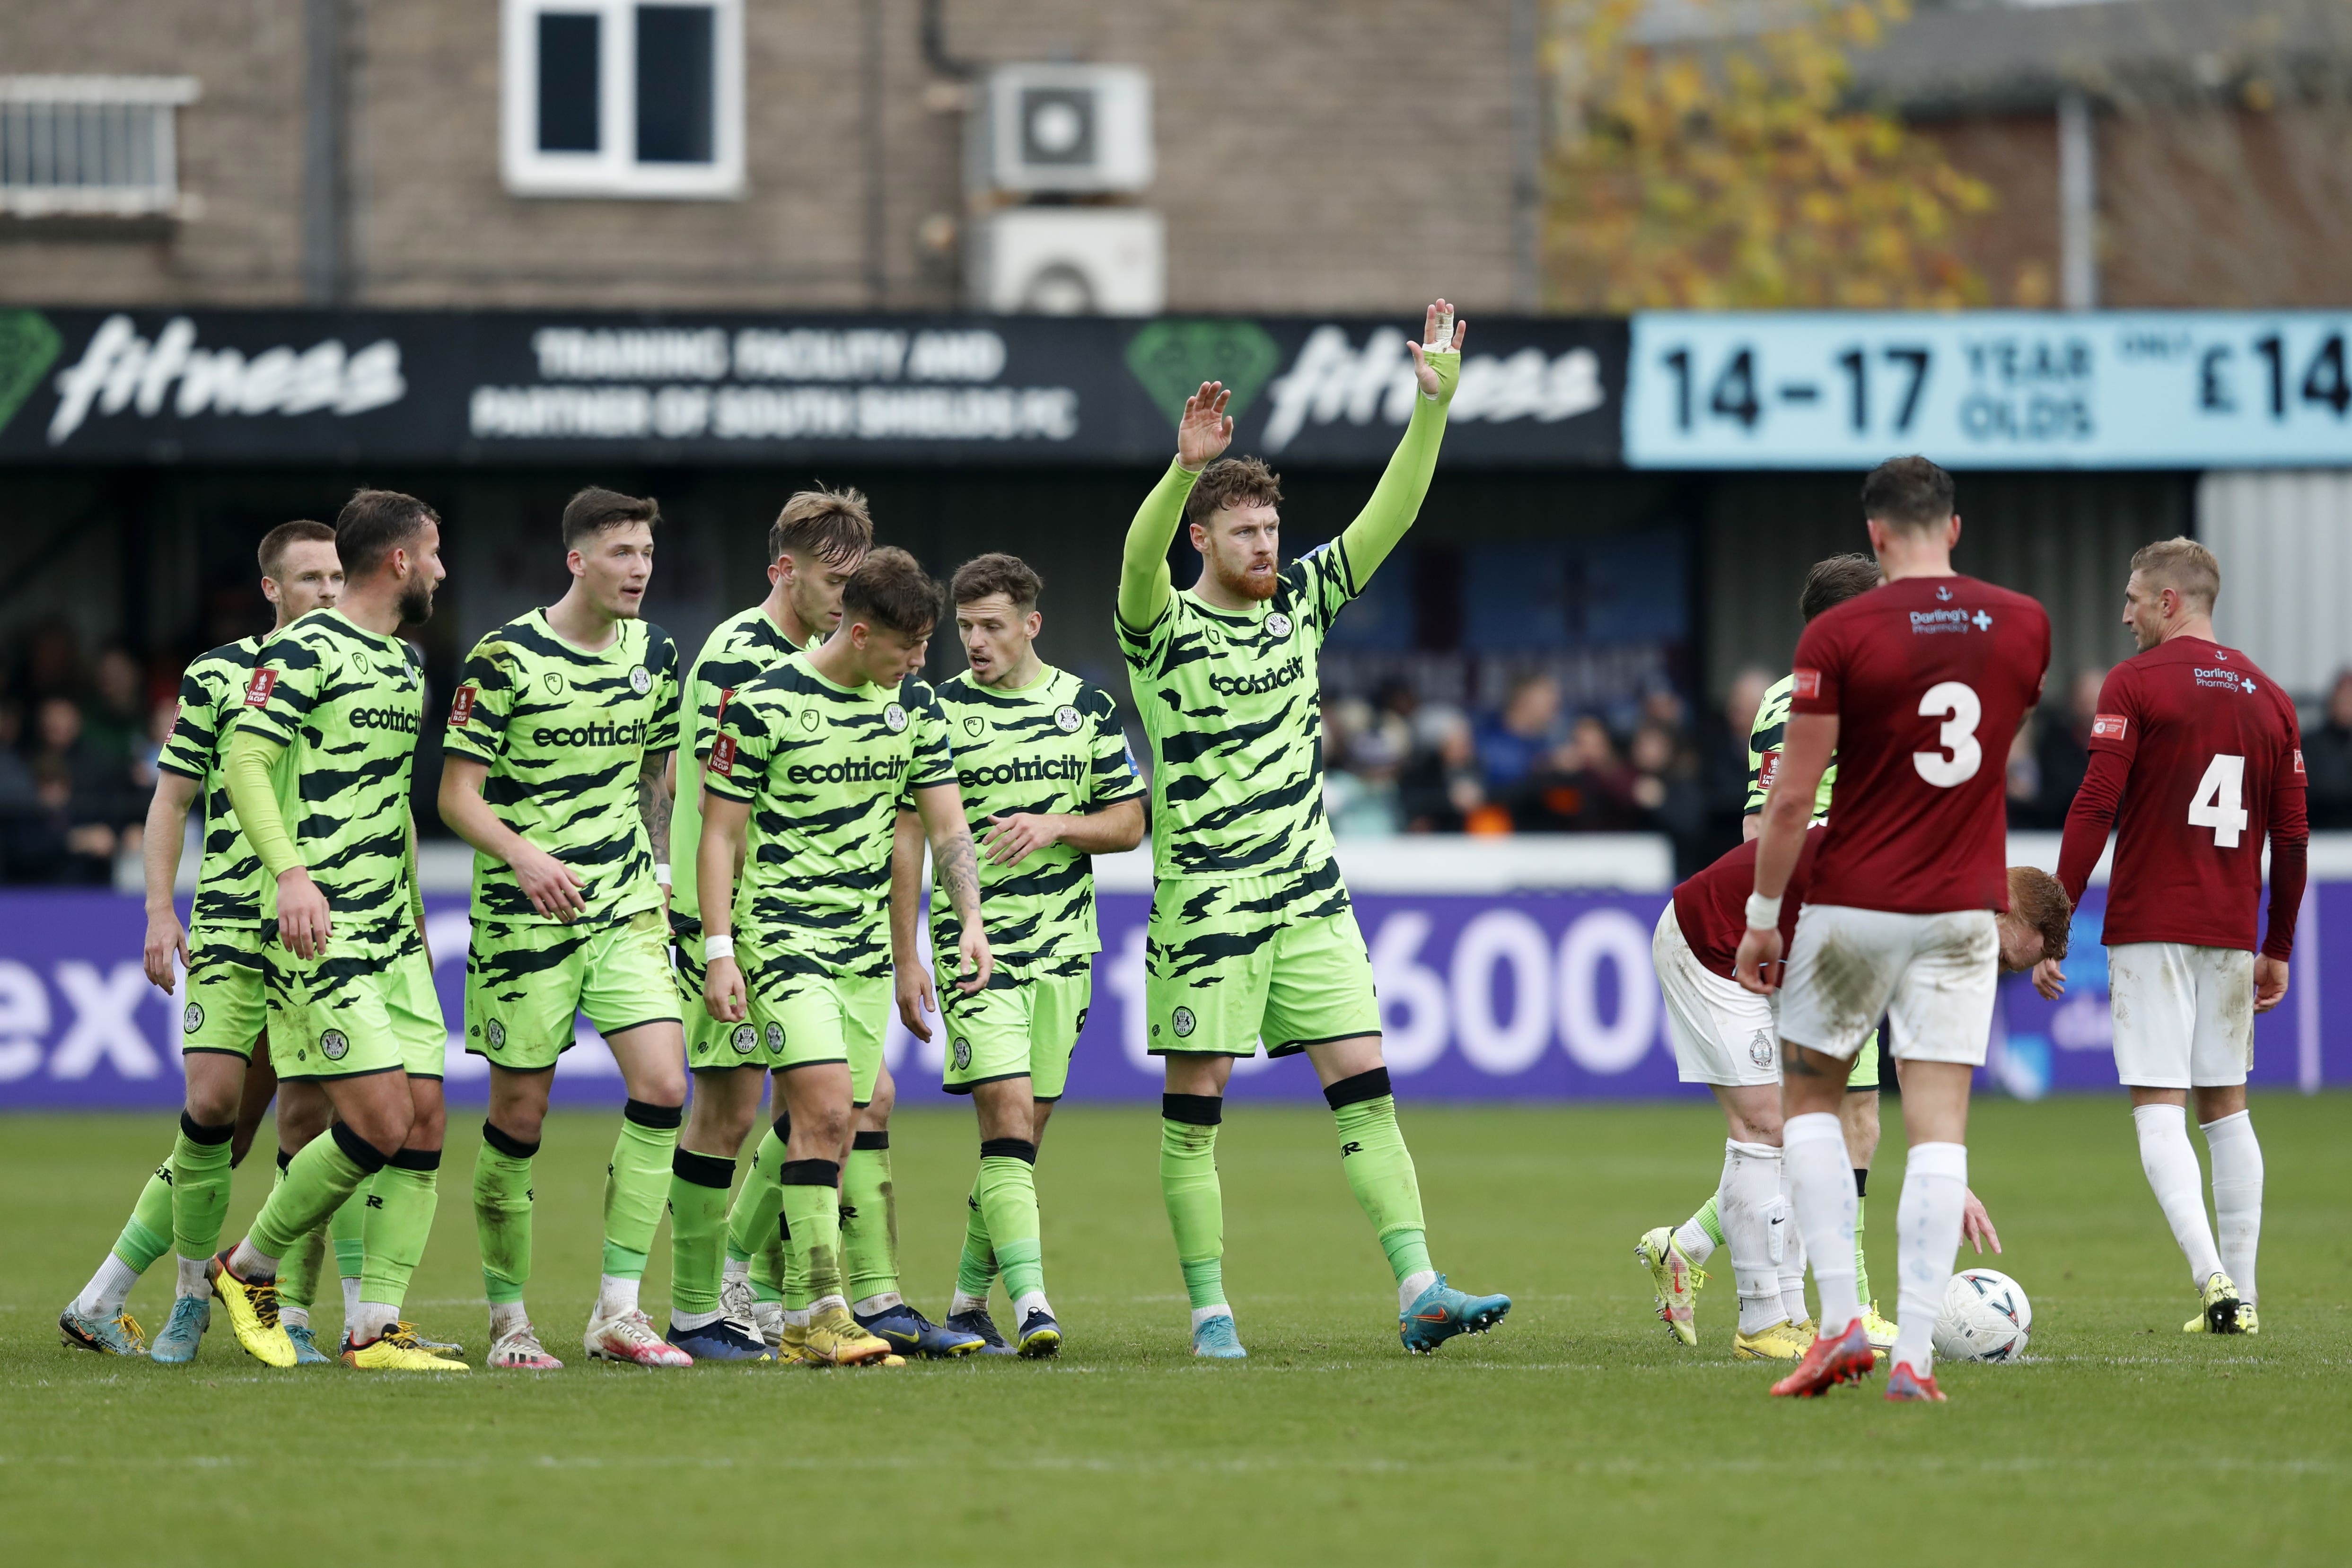 Forest Green’s Connor Wickham celebrates after scoring the second goal at South Shields (Will Matthews/PA).